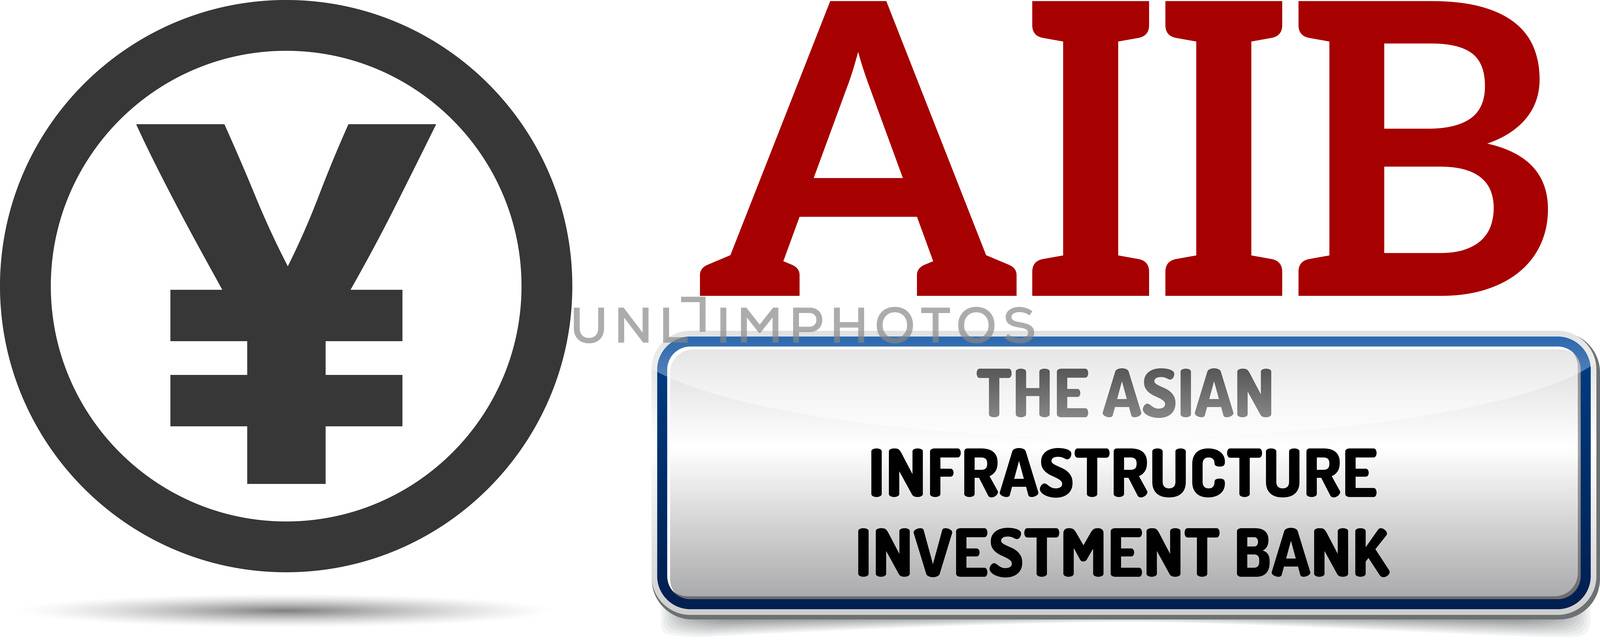 AIIB - The Asian Infrastructure Investment Bank by akaprinay